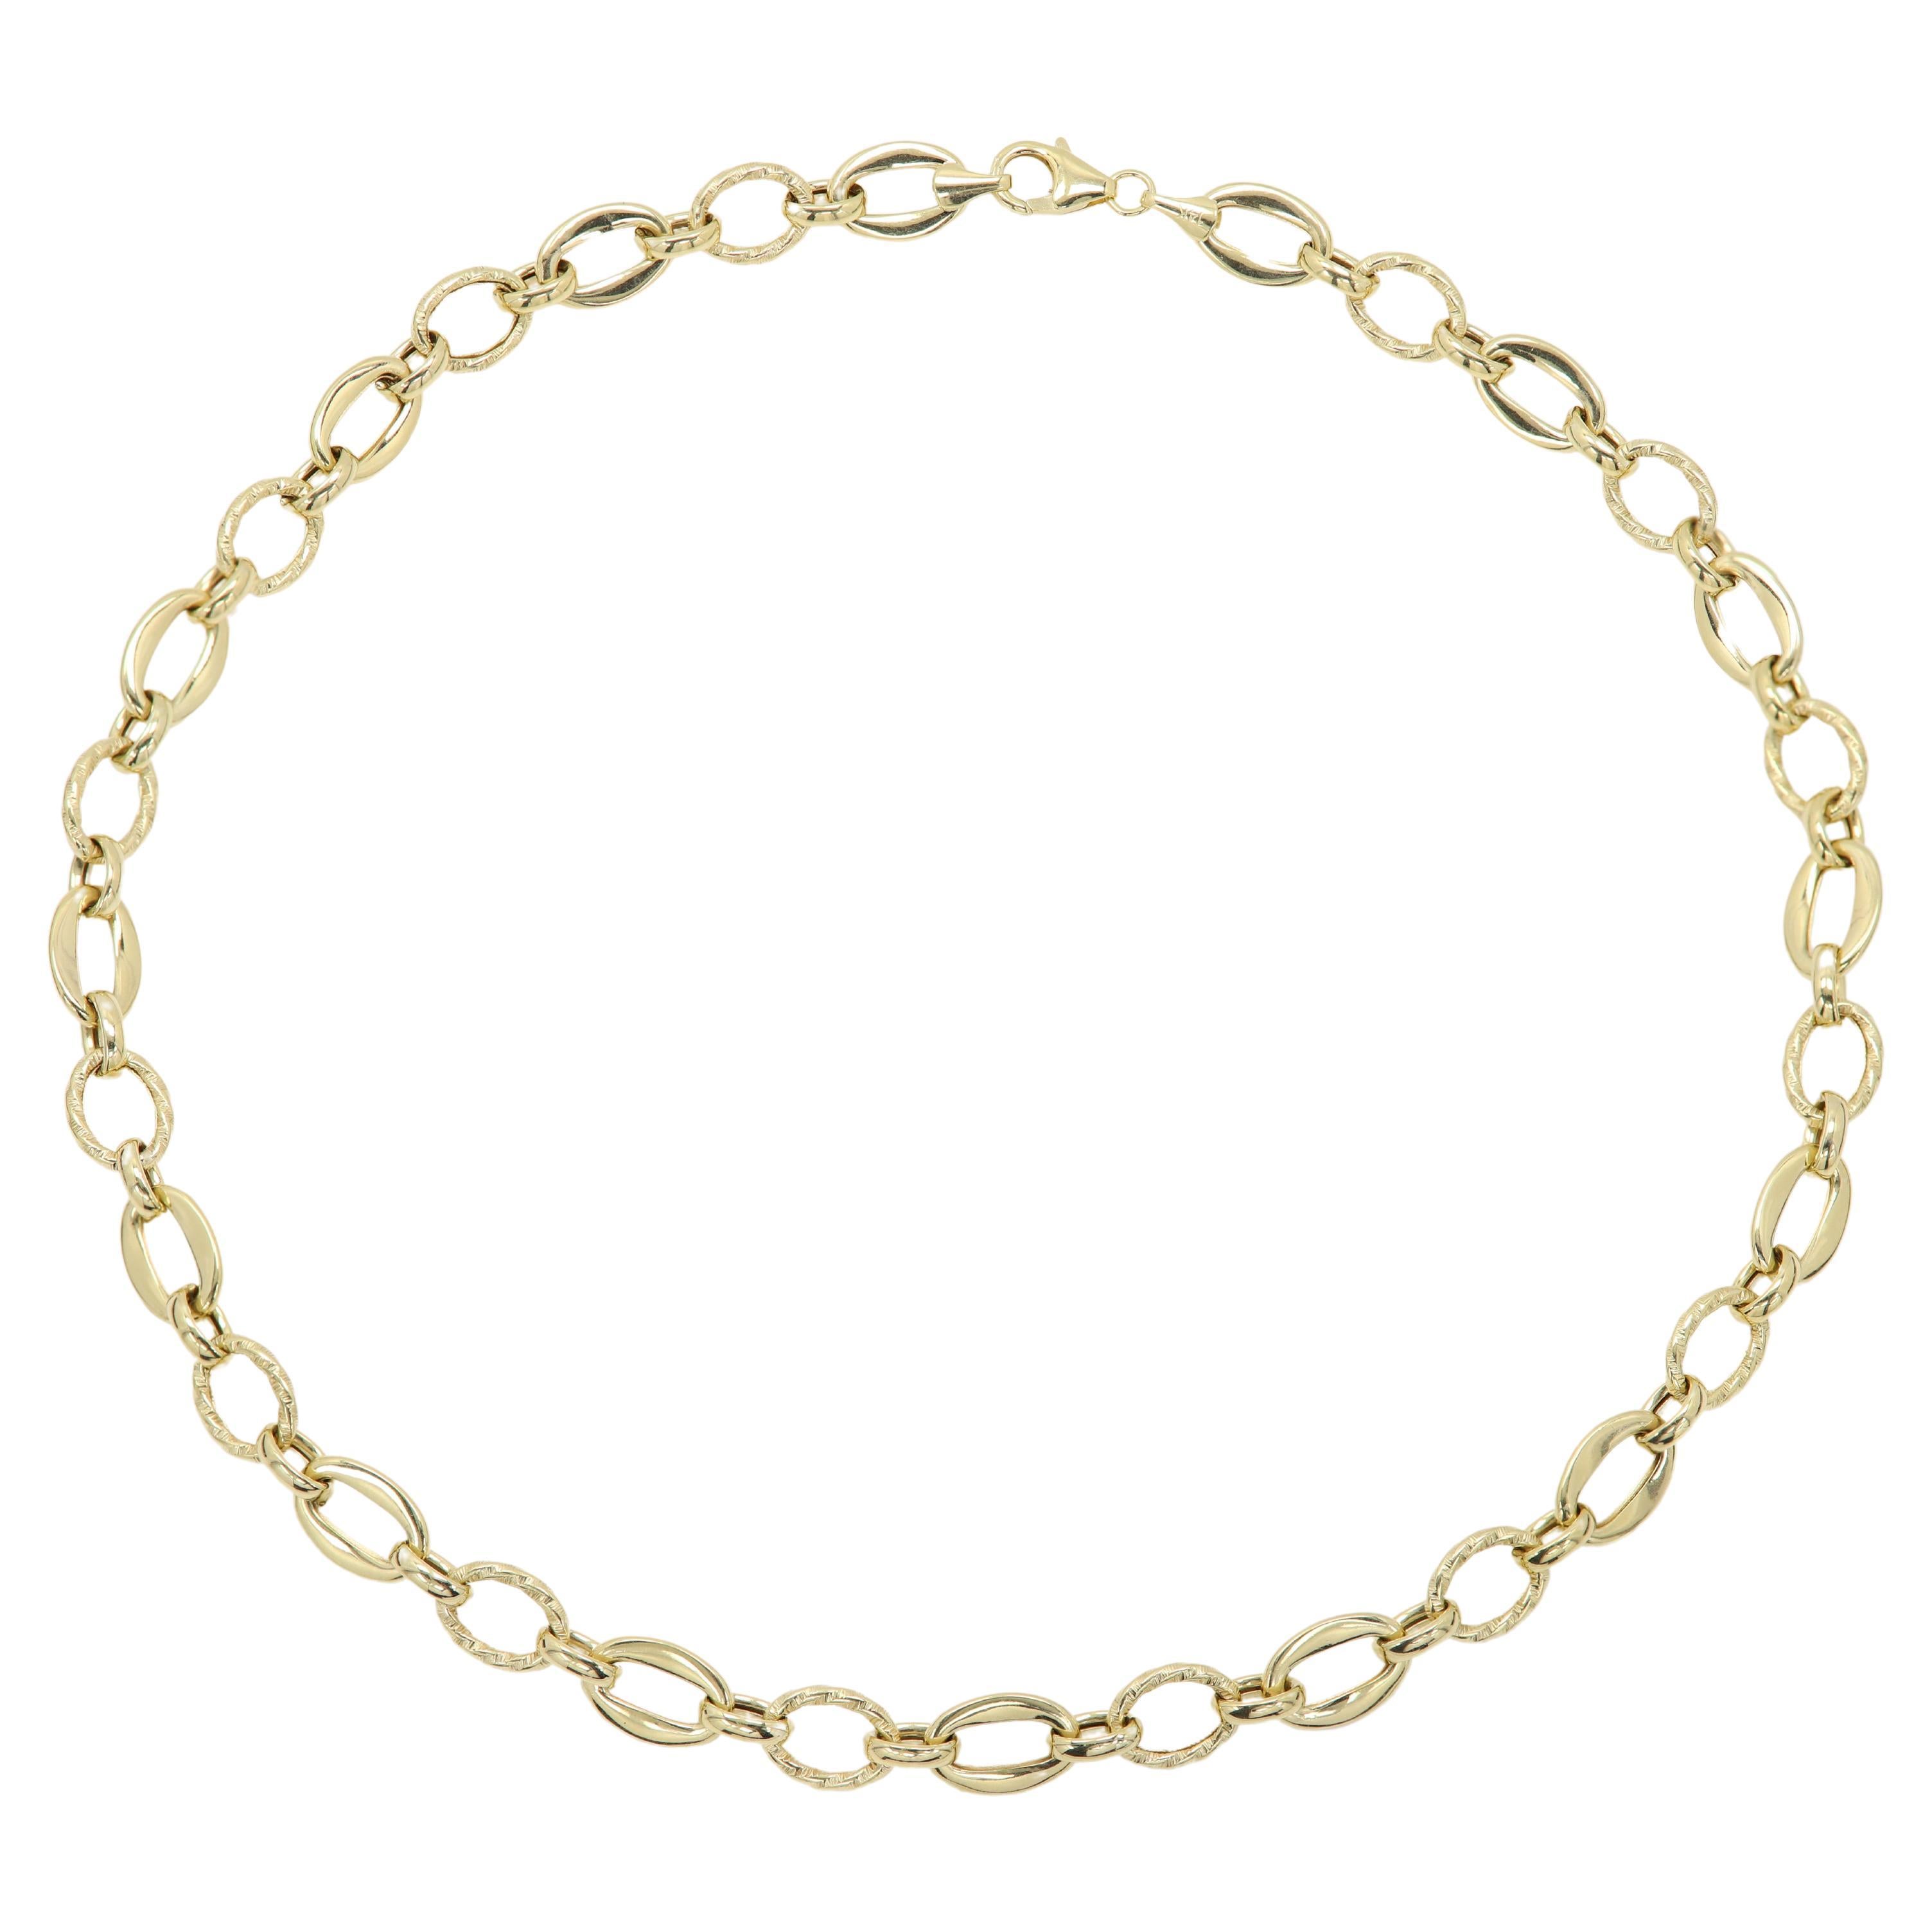 Made In Italy
Beautify crafted -with creative elements in the link and chain design
Appears very Elegant on the skin !
14k Yellow Gold
Total Weight approx 15.0 grams
Necklace Length is 18' Inch (can be adjusted - please inquire)
Bracelet Length is